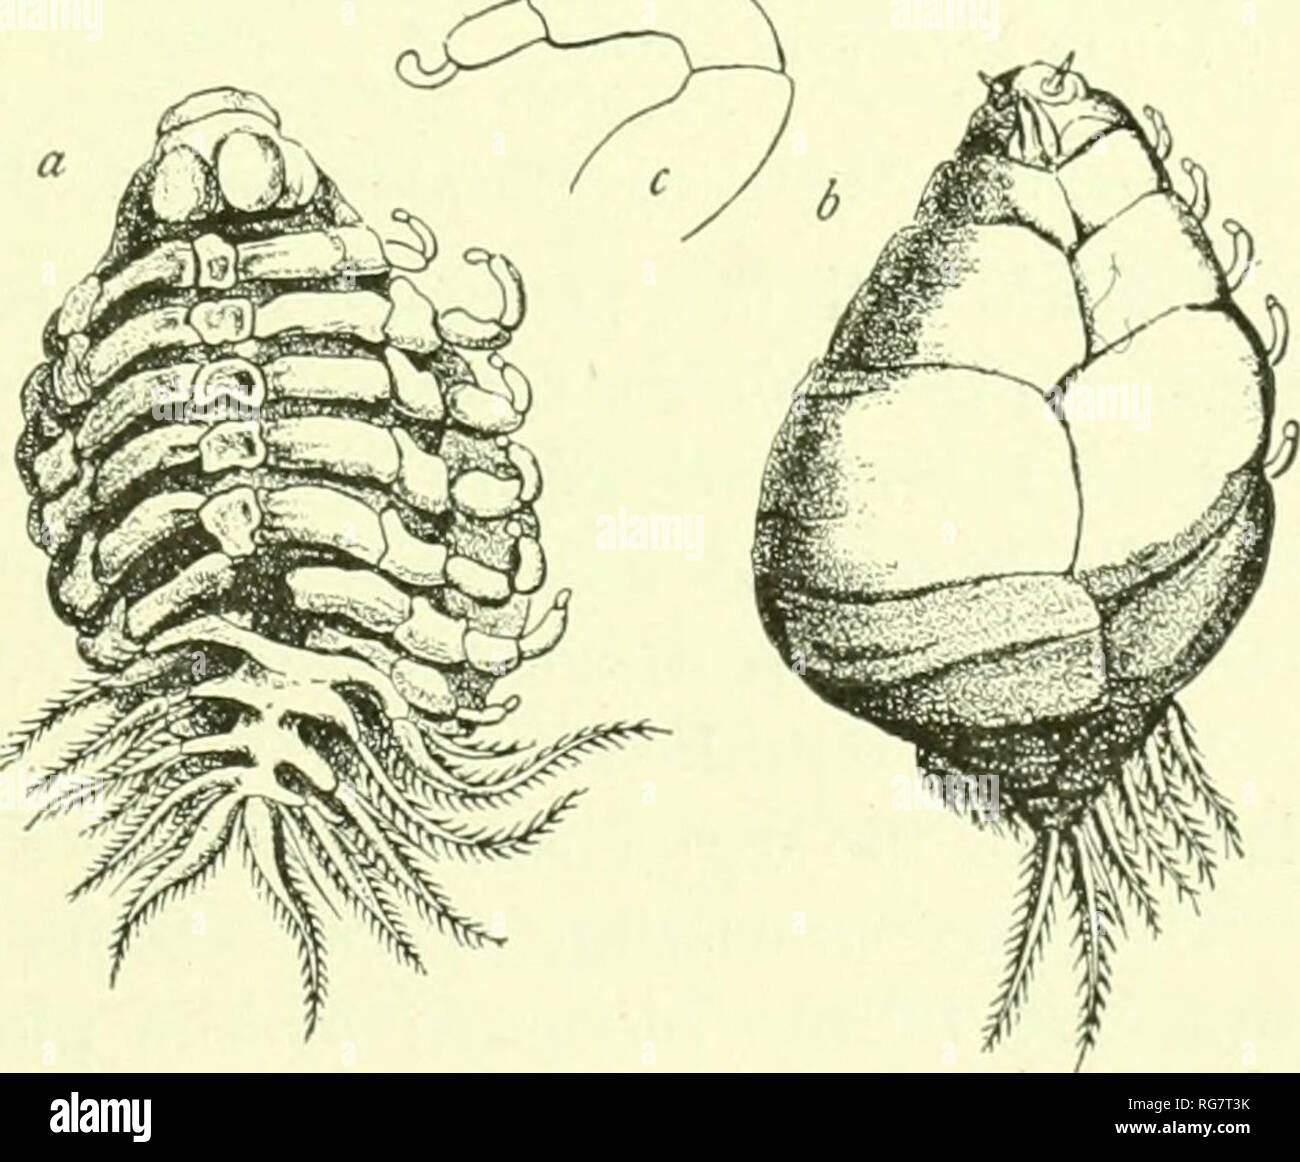 . Bulletin - United States National Museum. Science. ISOPODS OF NORTH AMP:R10A. 511 83. Genus LEIDYA Cornalia and Panceri. Abdomen distinctly sojrmontod. PUninil lumelliv or lateral parts of the tirst five segments of the abdomen lanceolate, rtnely fringed. Legs of female terminate in a short, blunt claw. Exopods present and nearly etiiial on all seven paii's of legs. The pleopods are '' lanceolate and fringed.&quot; Male has the abdomen distincth&quot; segmented. There are five pairs of simple rudimentary pleopods. Uropoda simple, in the form of two long appendages attached to the sixth al)do Stock Photo